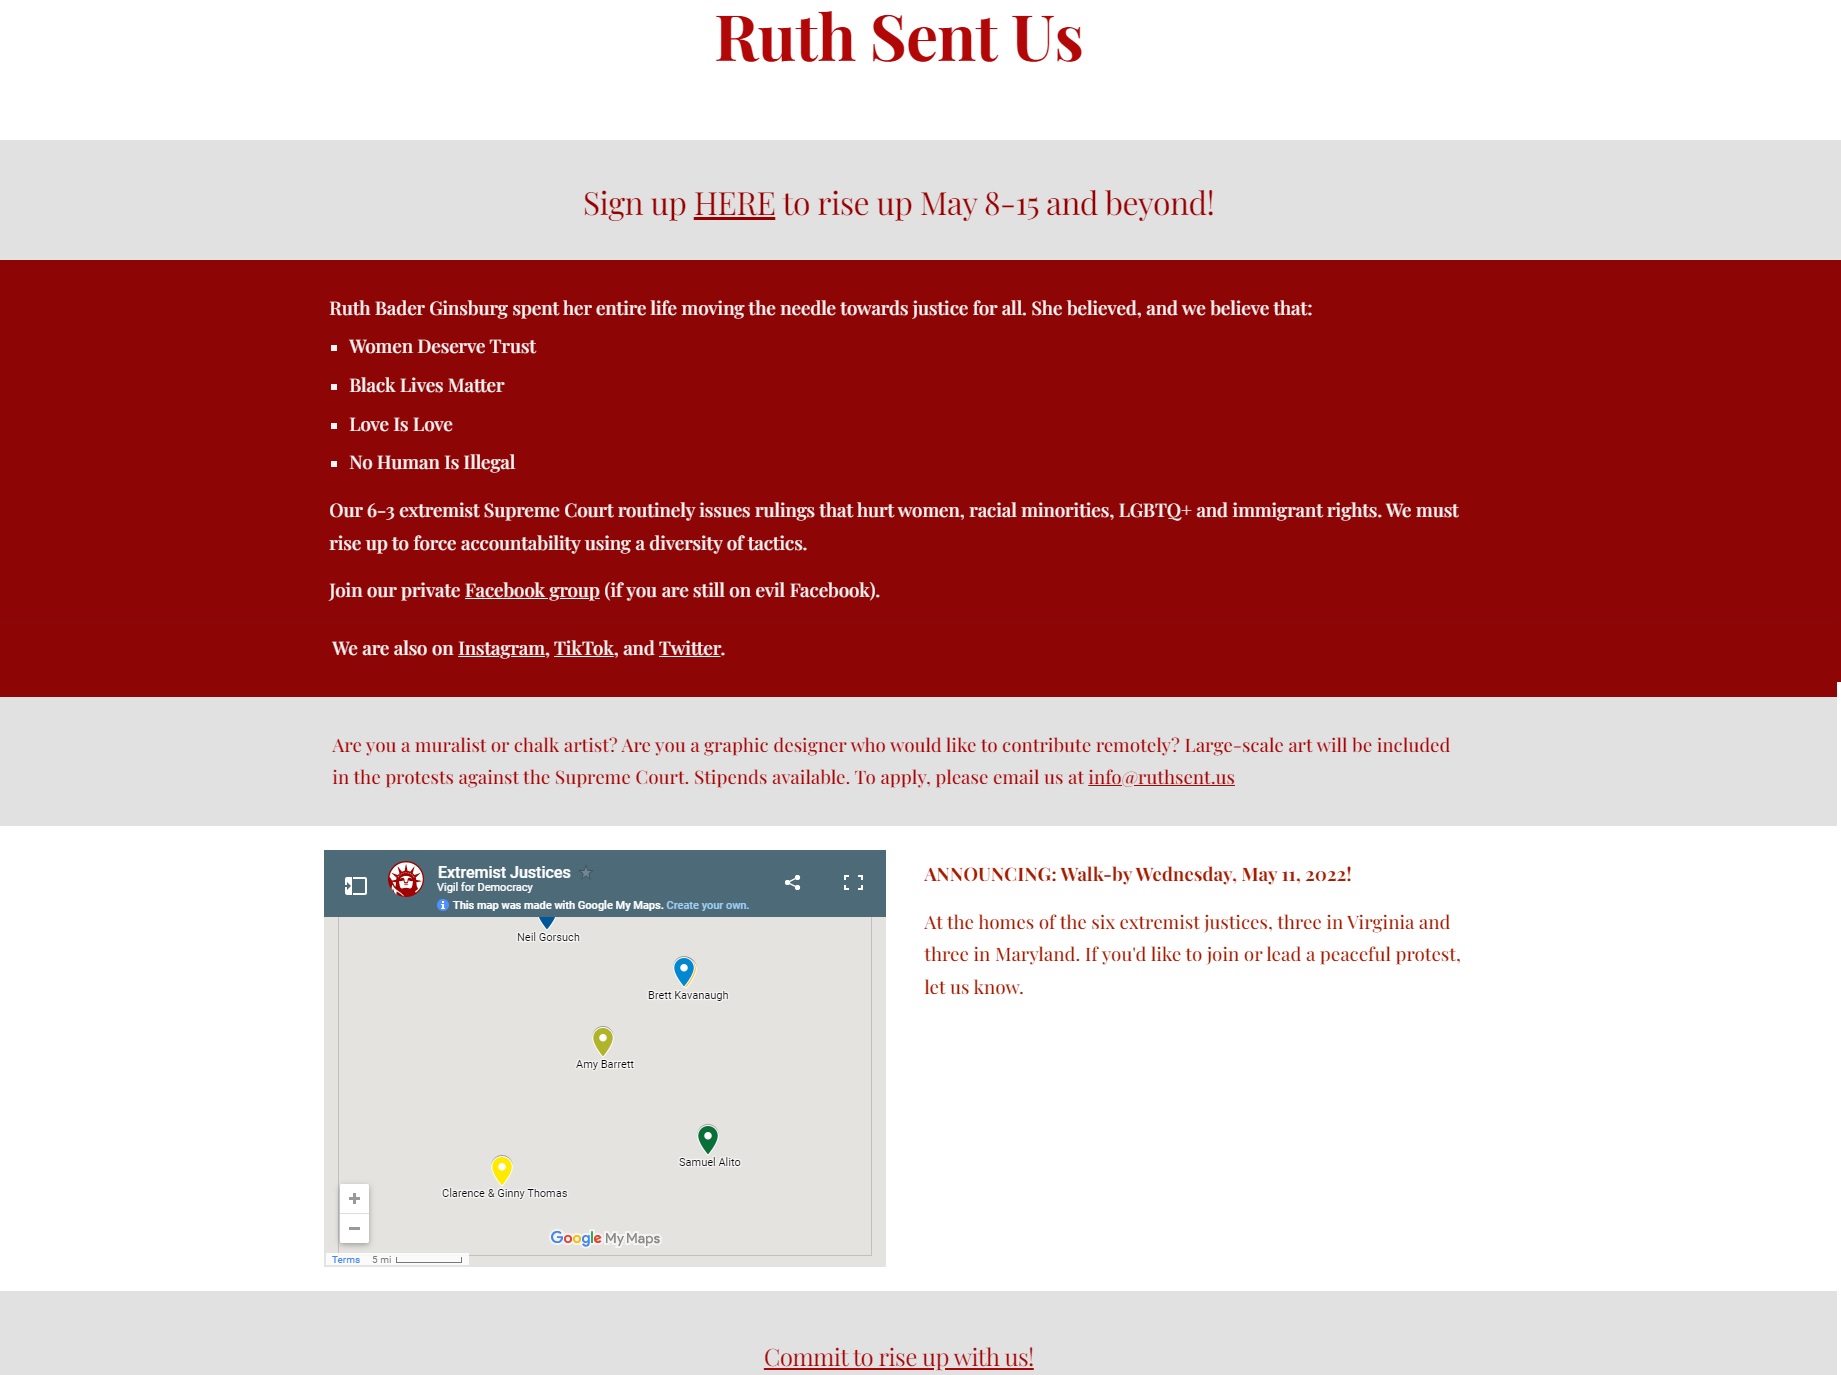 Image: RuthSentUs map to SCOTUS home addresses archived from May 5,2022